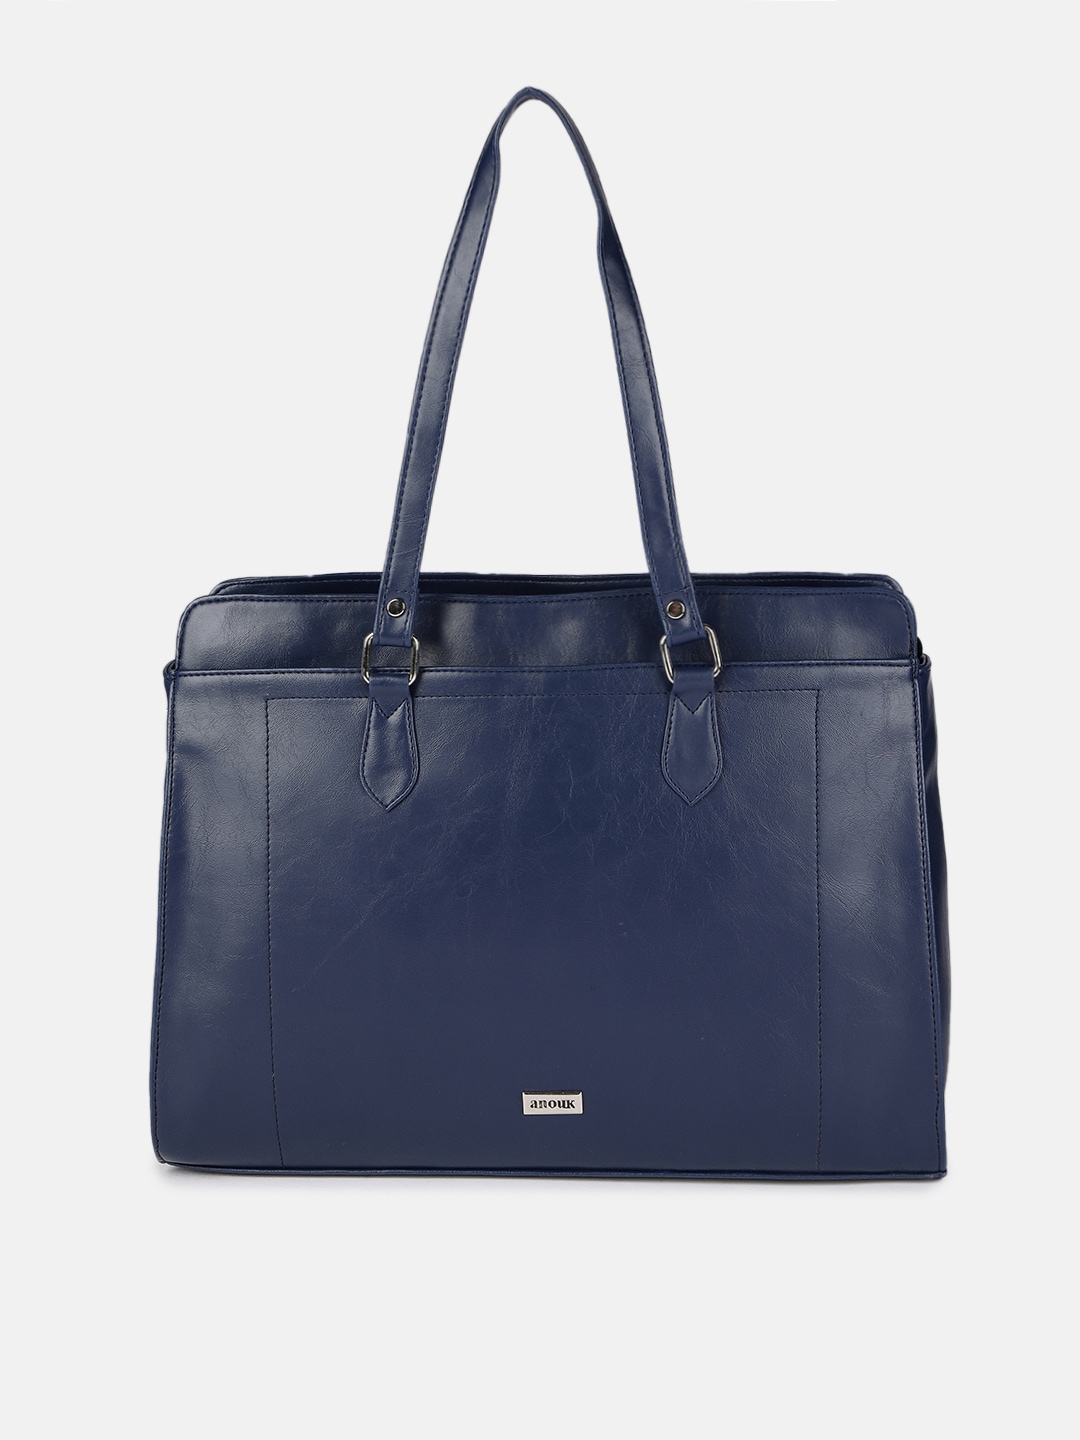 Anouk Navy Blue Solid Shoulder Bag Price in India